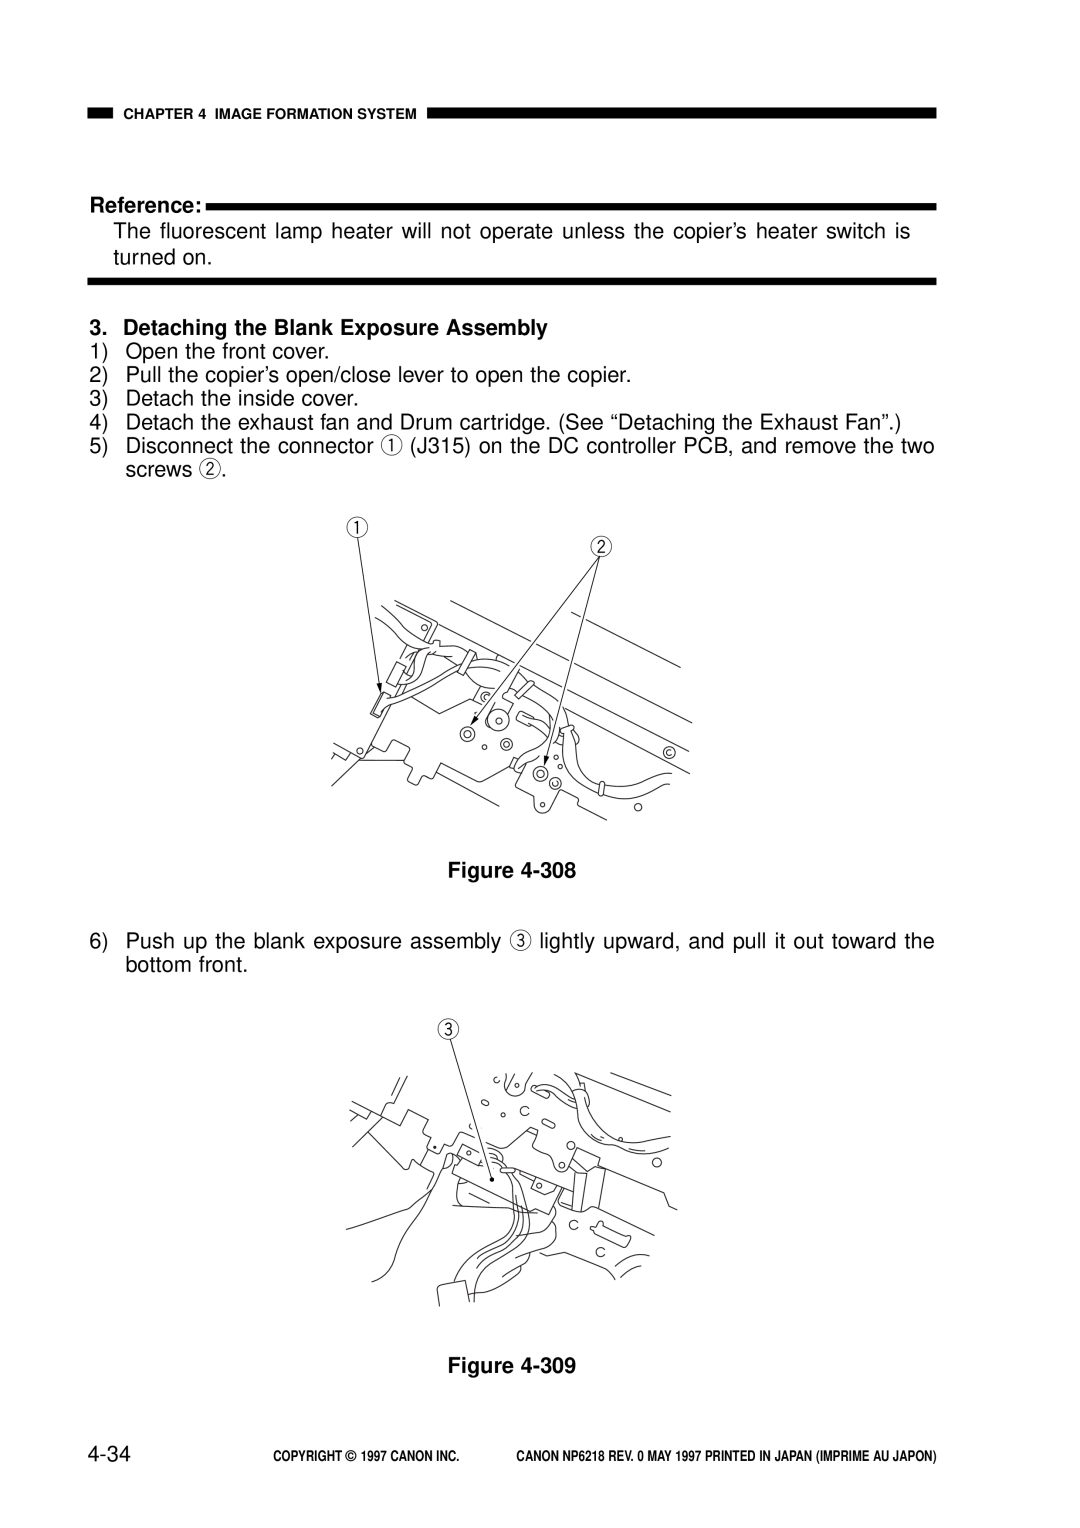 Canon NP6218, FY8-13EX-000 service manual Detaching the Blank Exposure Assembly, 4-34, Reference 